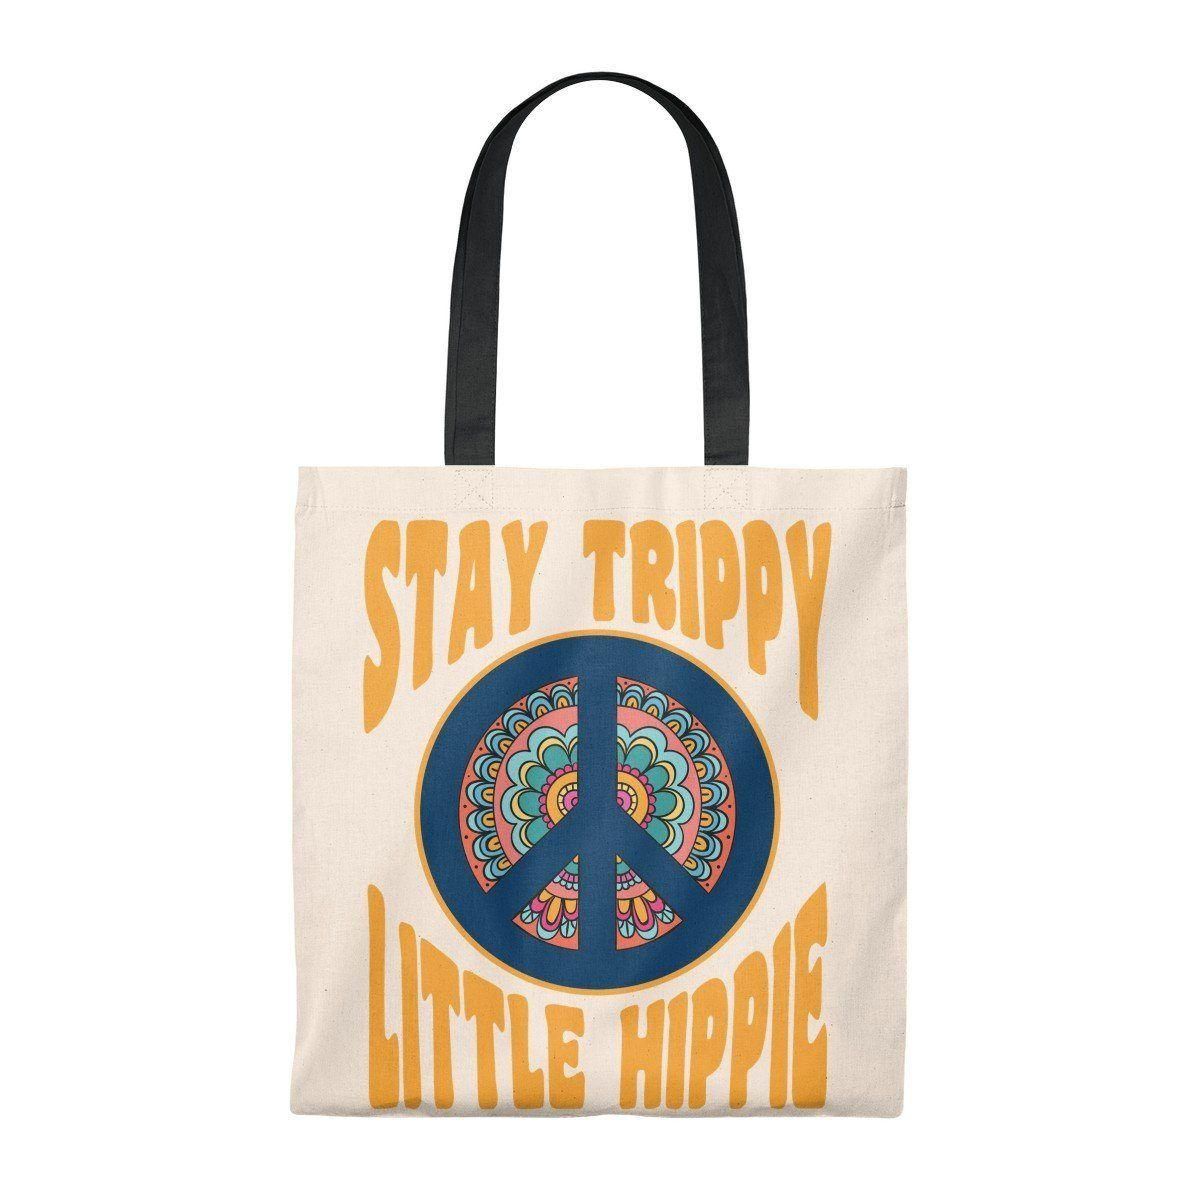 Stay Trippy Little Hippie Tote Bag